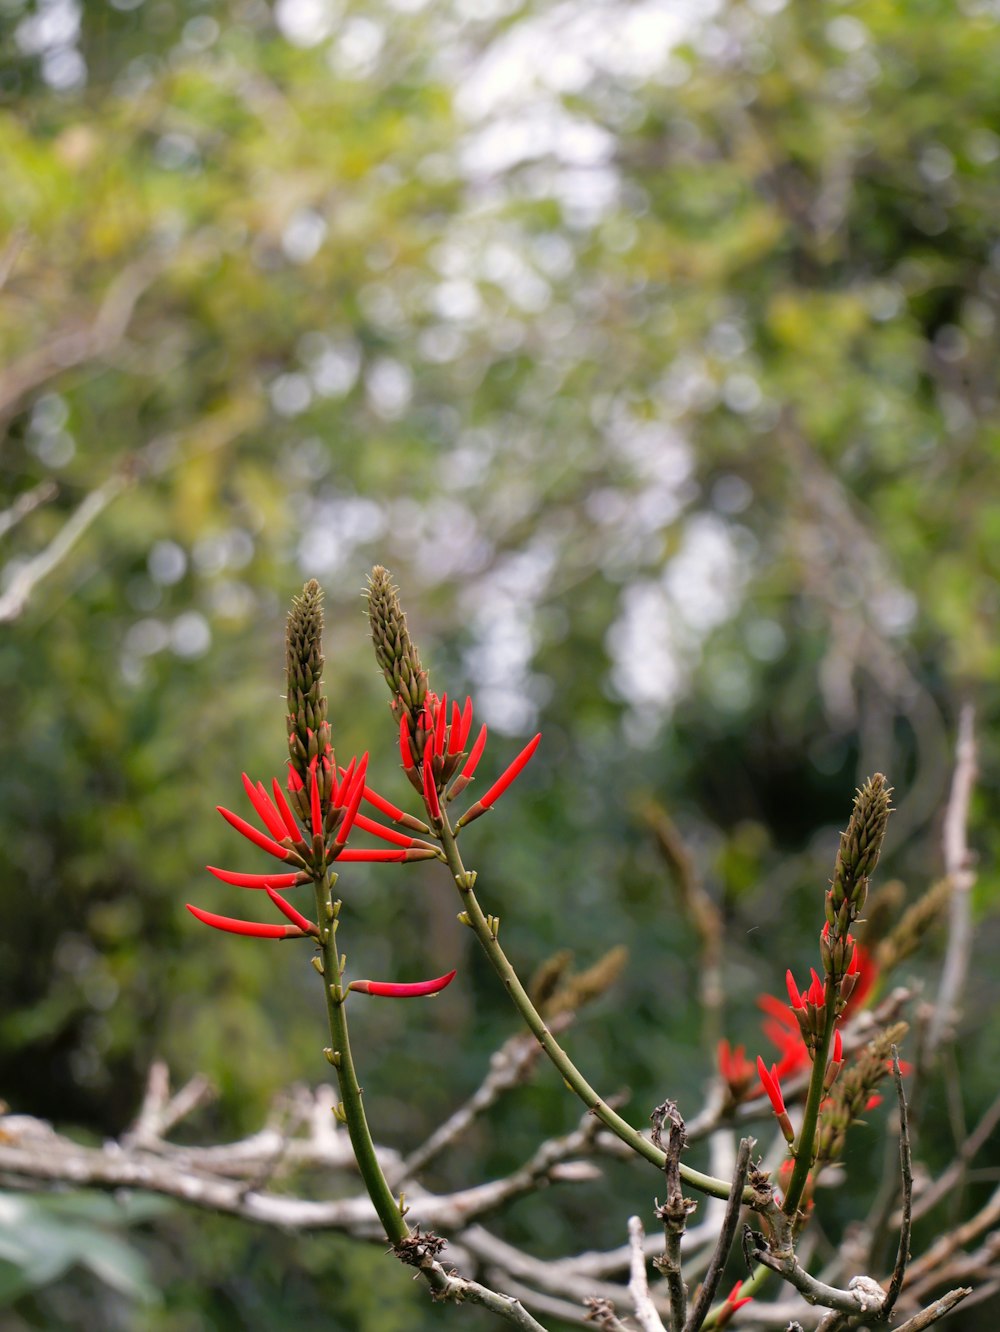 a close up of a red flower on a tree branch